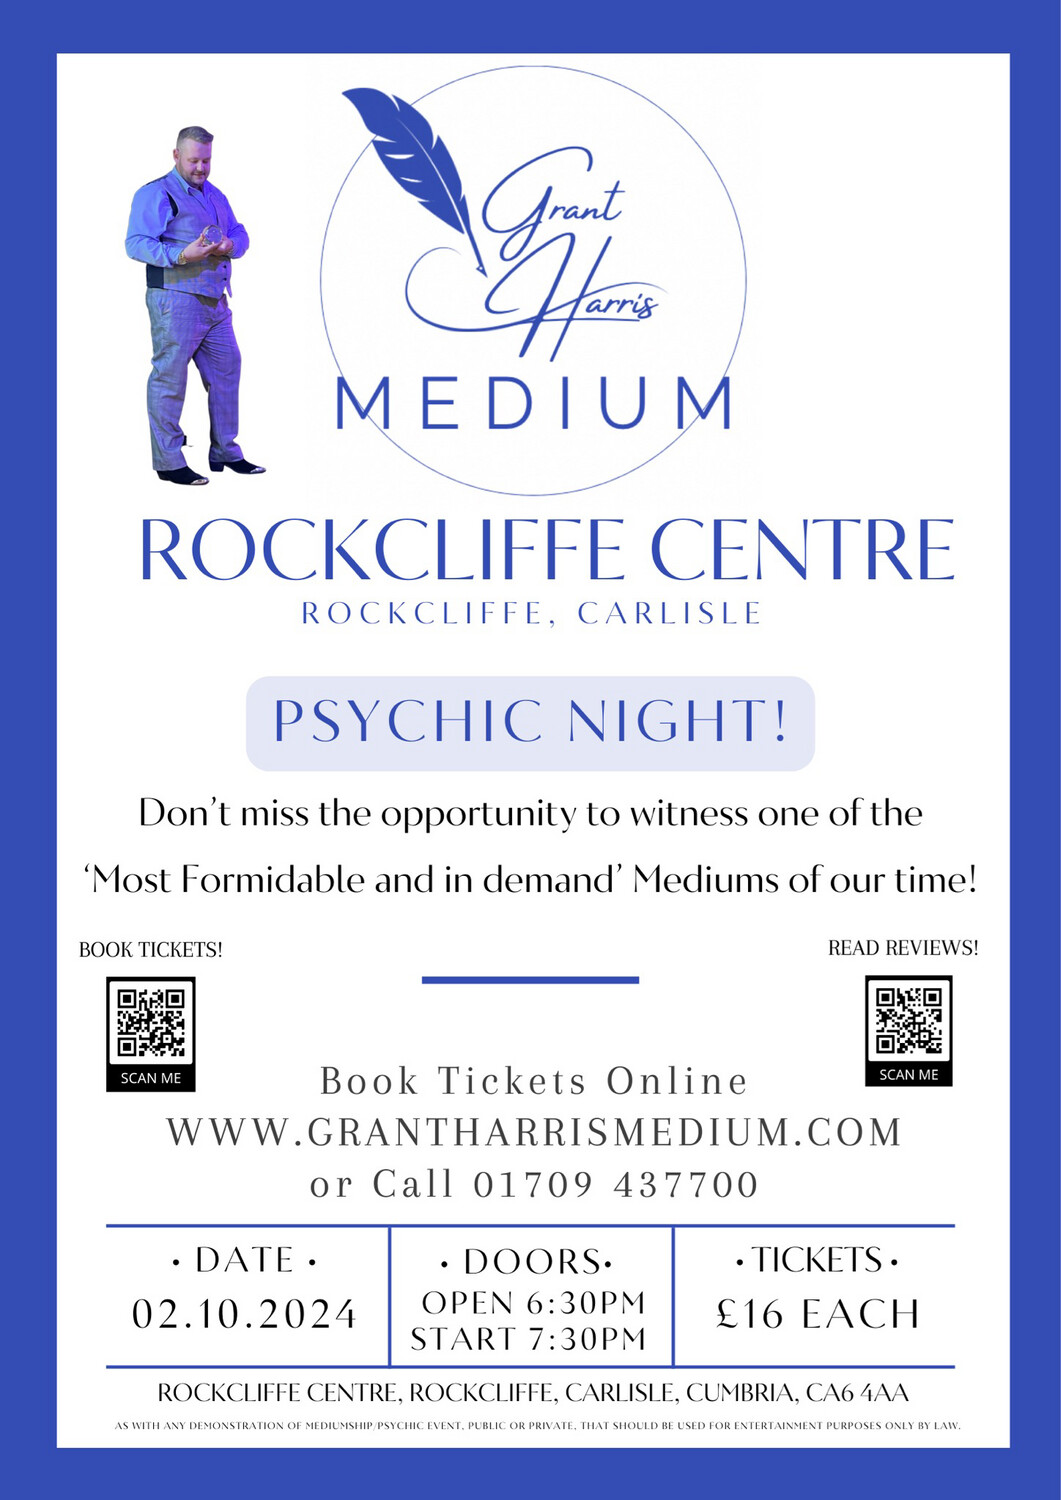 Psychic Night | Rockcliffe Centre, Carlisle, Wed 2nd October 2024